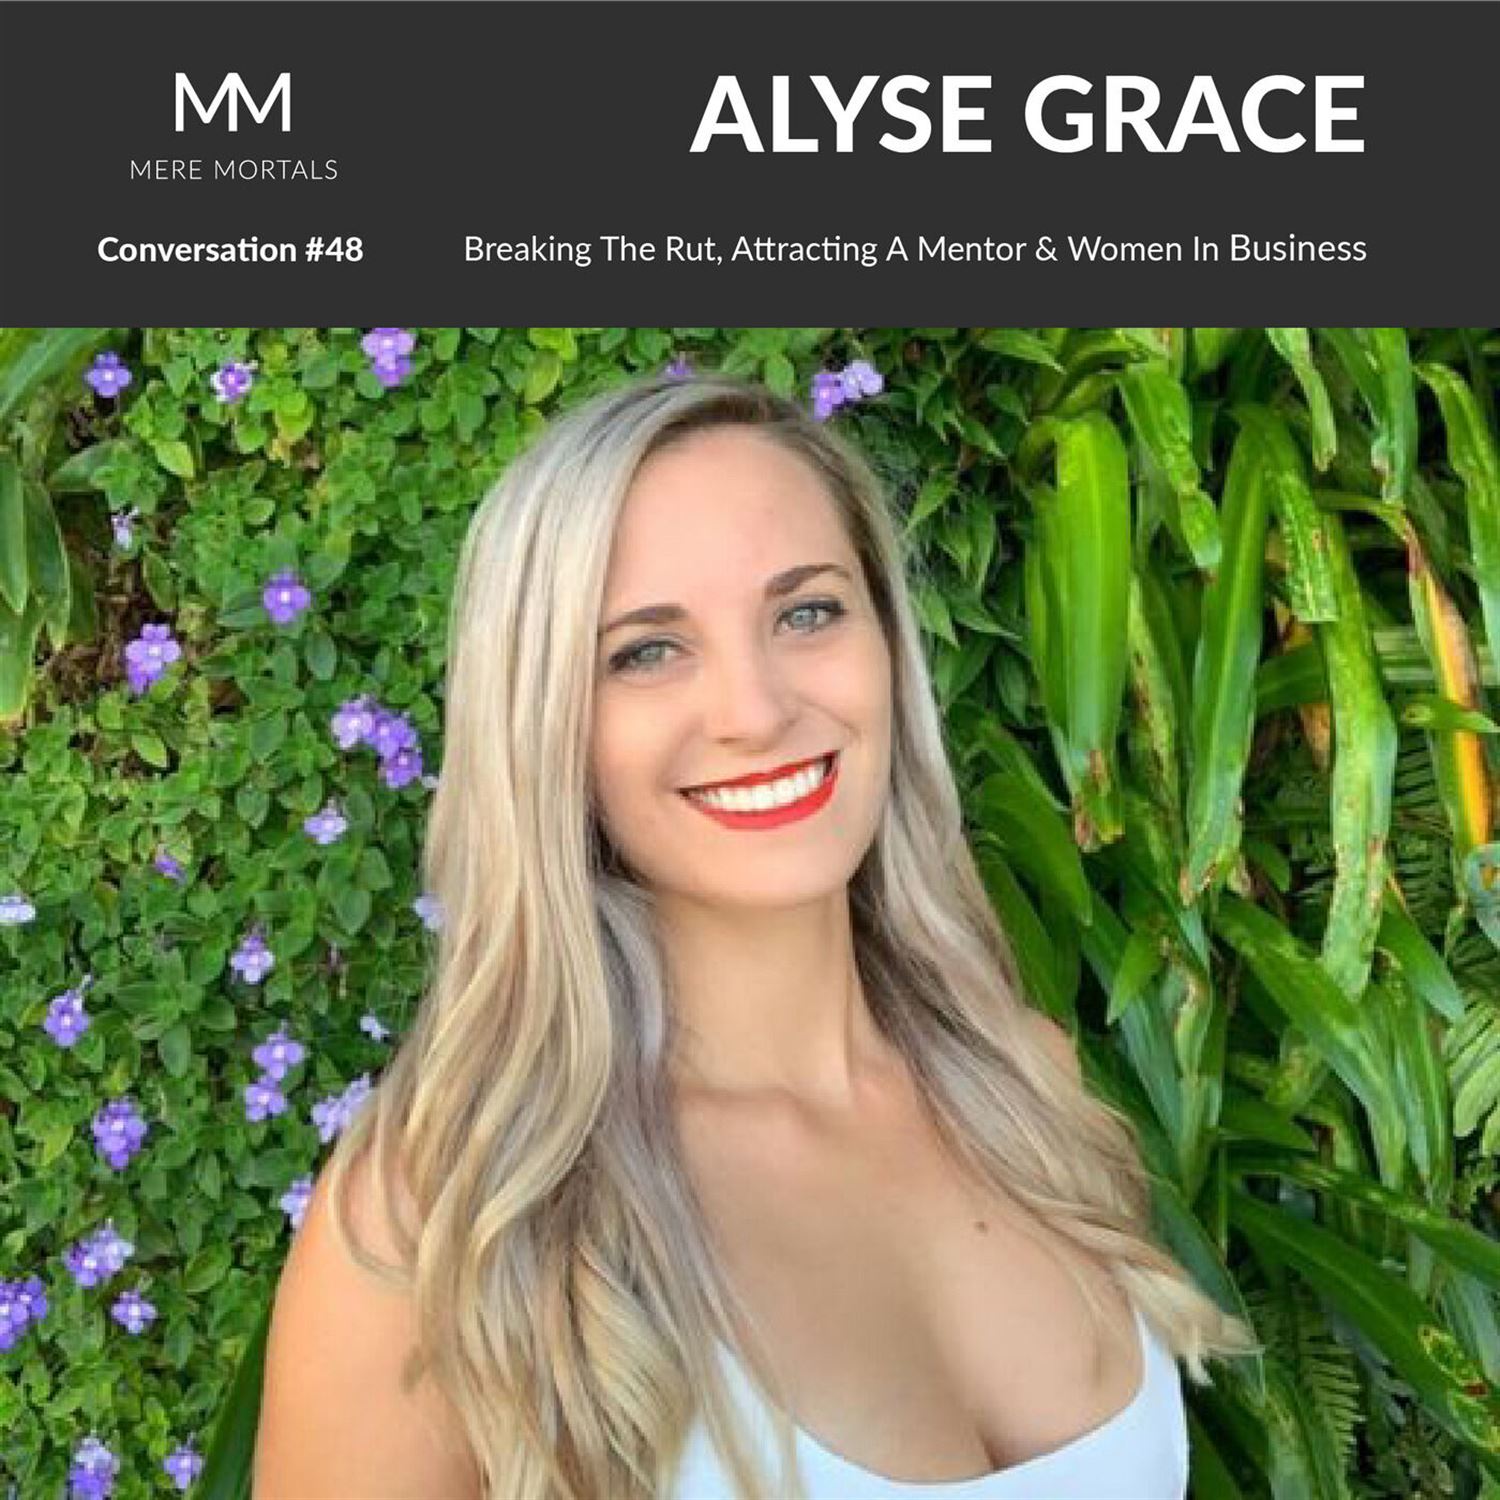 ALYSE GRACE | Breaking The Rut, Attracting A Mentor & Women In Business